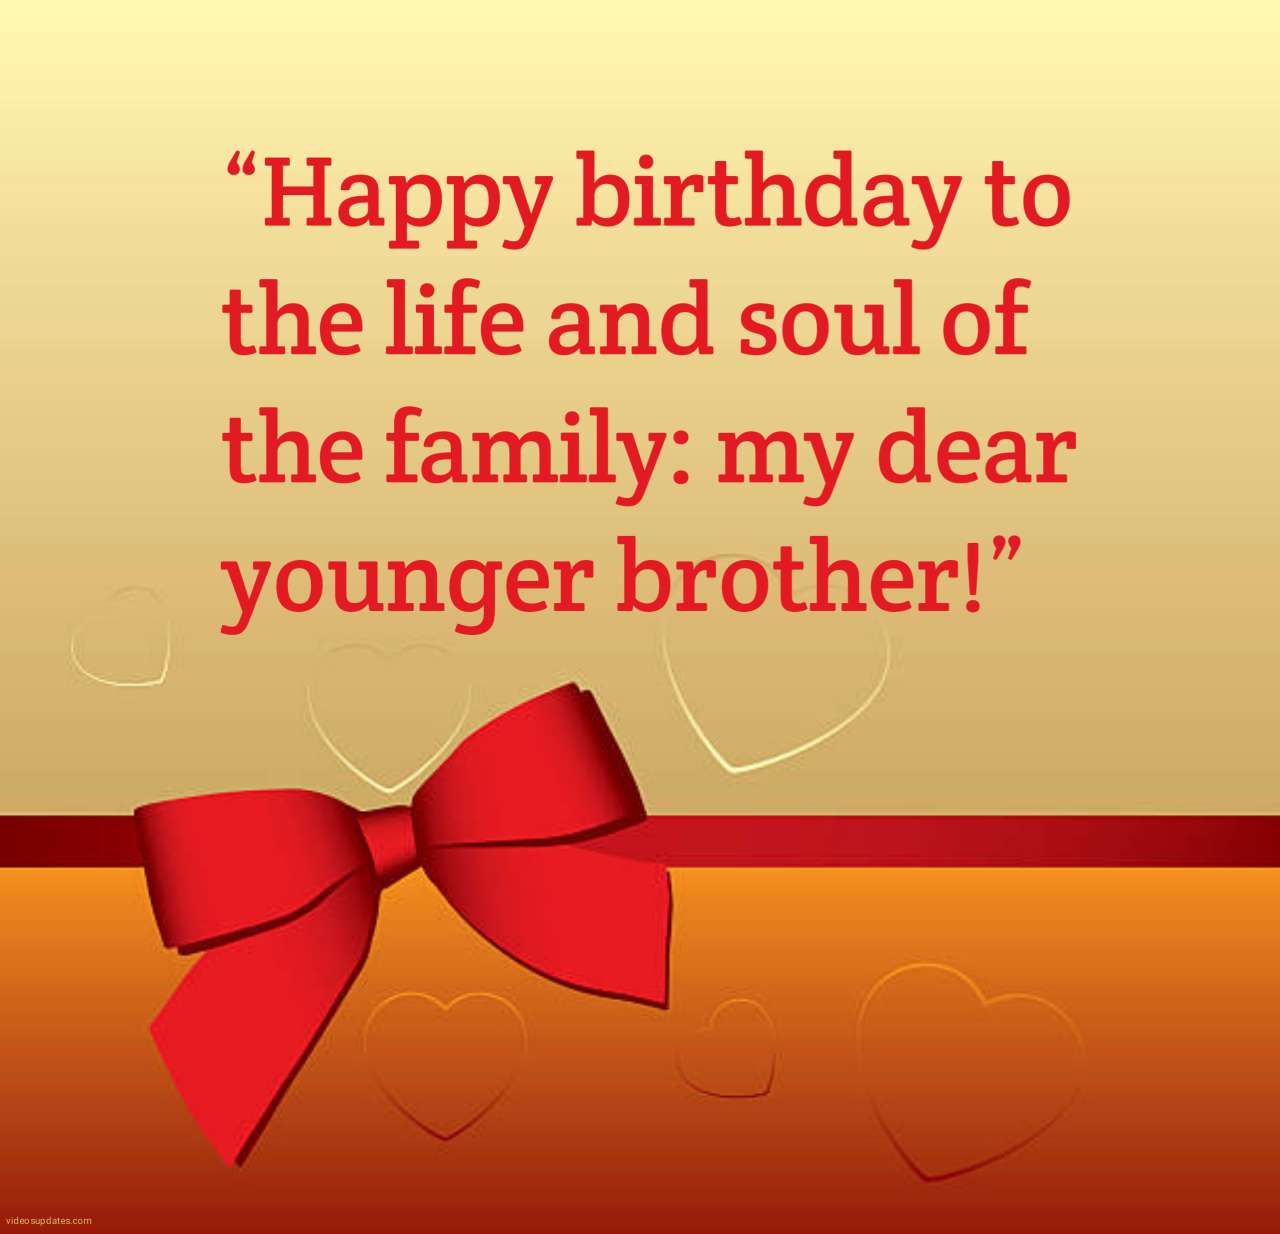 https://videosupdates.com/birthday-wishes-for-big-brother/